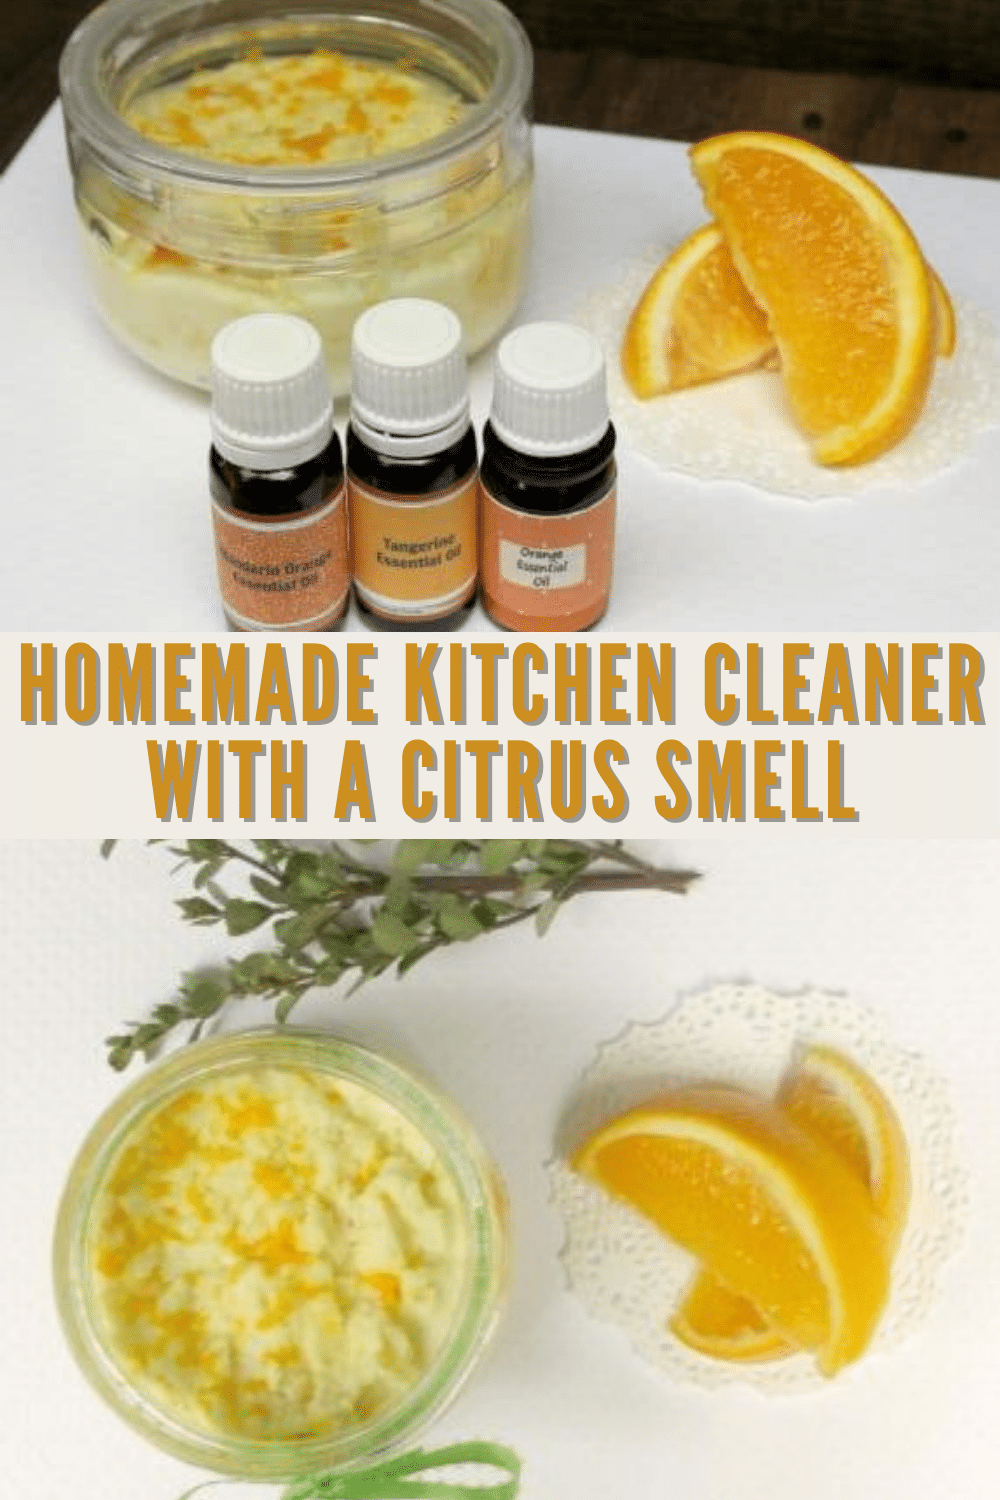 It is so easy to make this homemade kitchen cleaner. Knowing you are using a non-toxic kitchen cleaner makes you feel good and it is done in minutes. #essentialoils #homemadecleaner #diy via @wondermomwannab